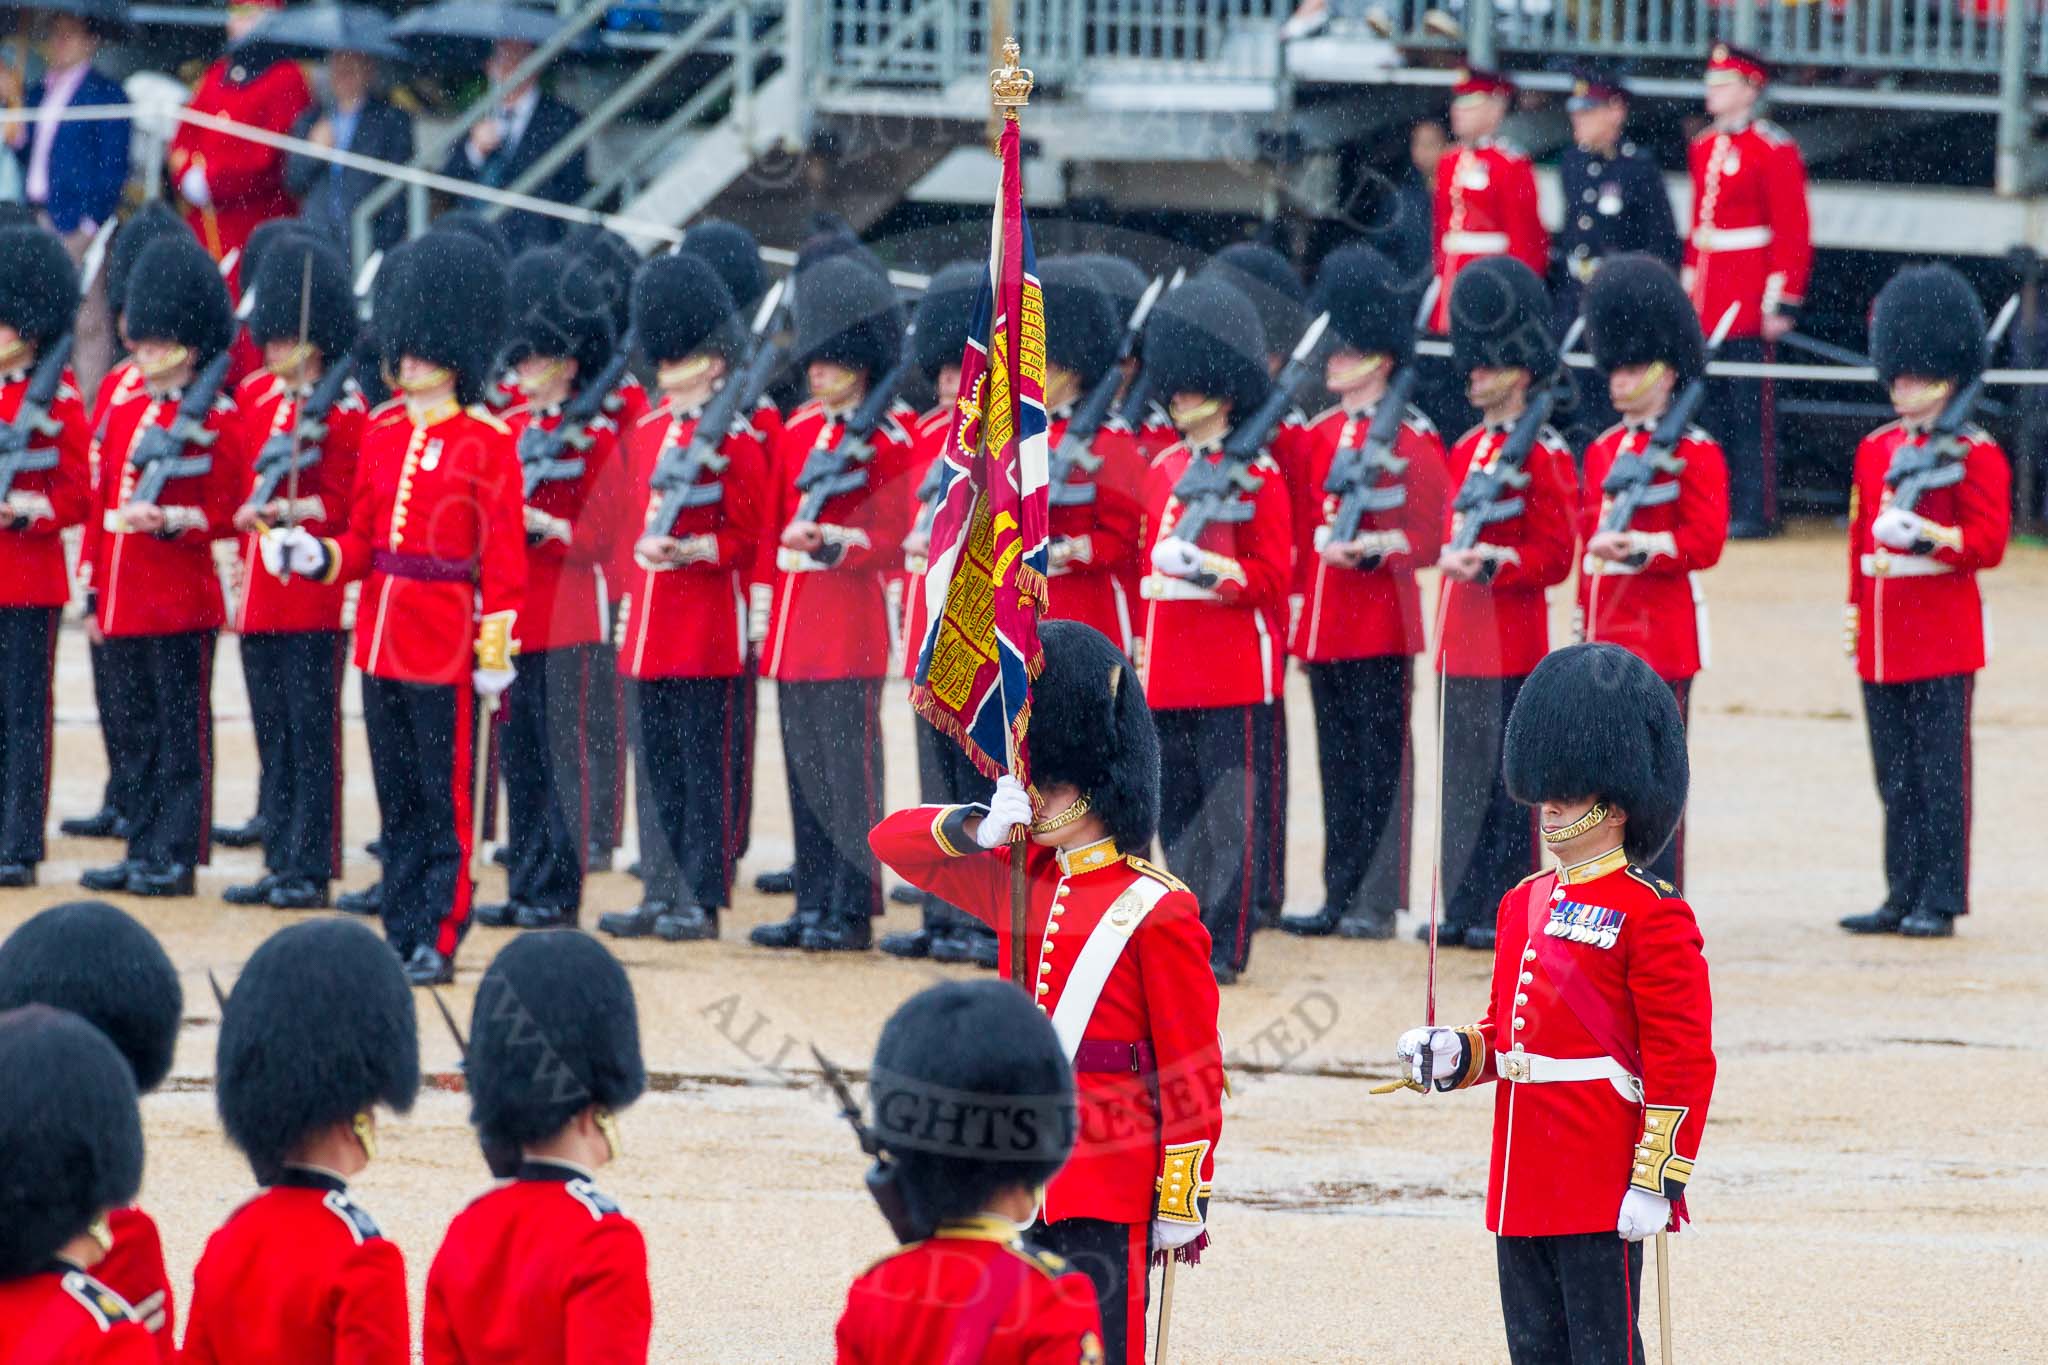 The Colonel's Review 2014.
Horse Guards Parade, Westminster,
London,

United Kingdom,
on 07 June 2014 at 11:20, image #402